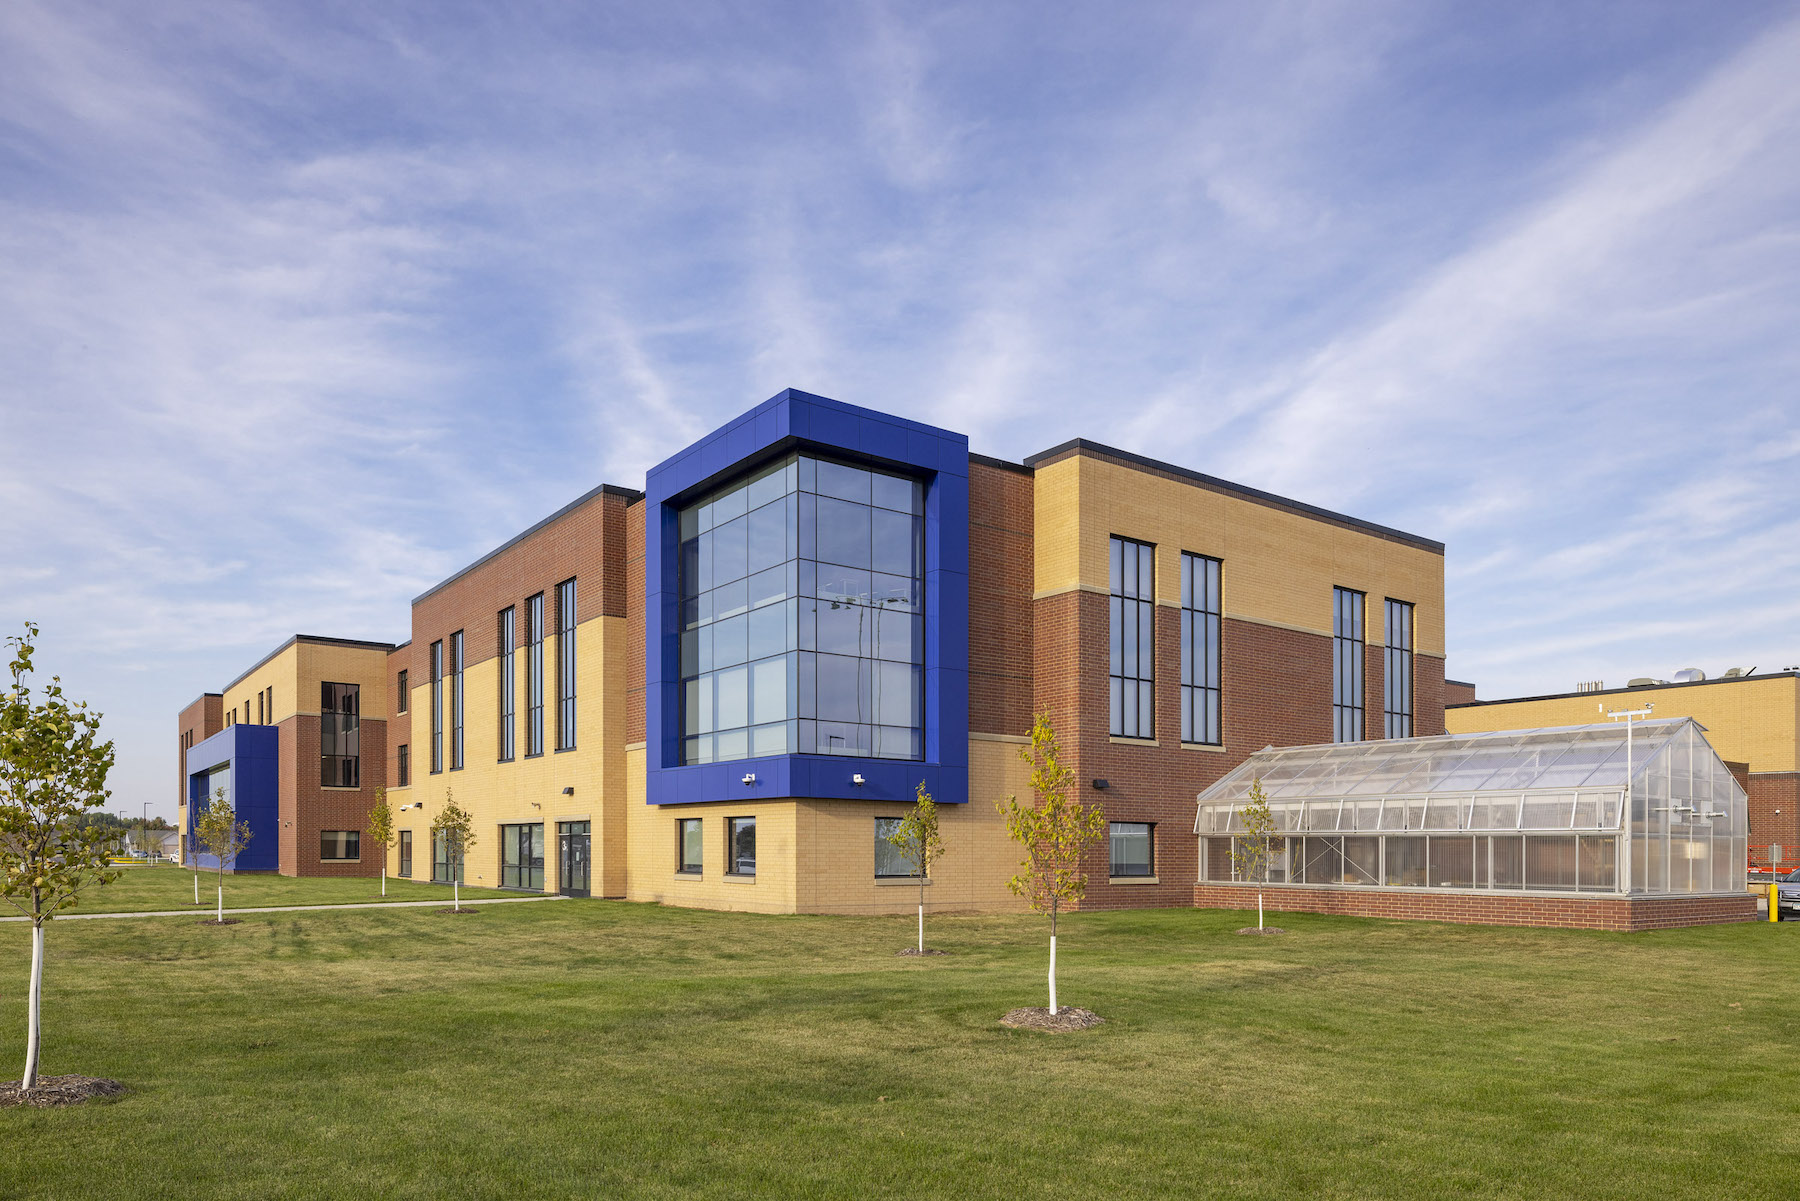 The new Owatonna High School in Minnesota was in development for nearly 10 years